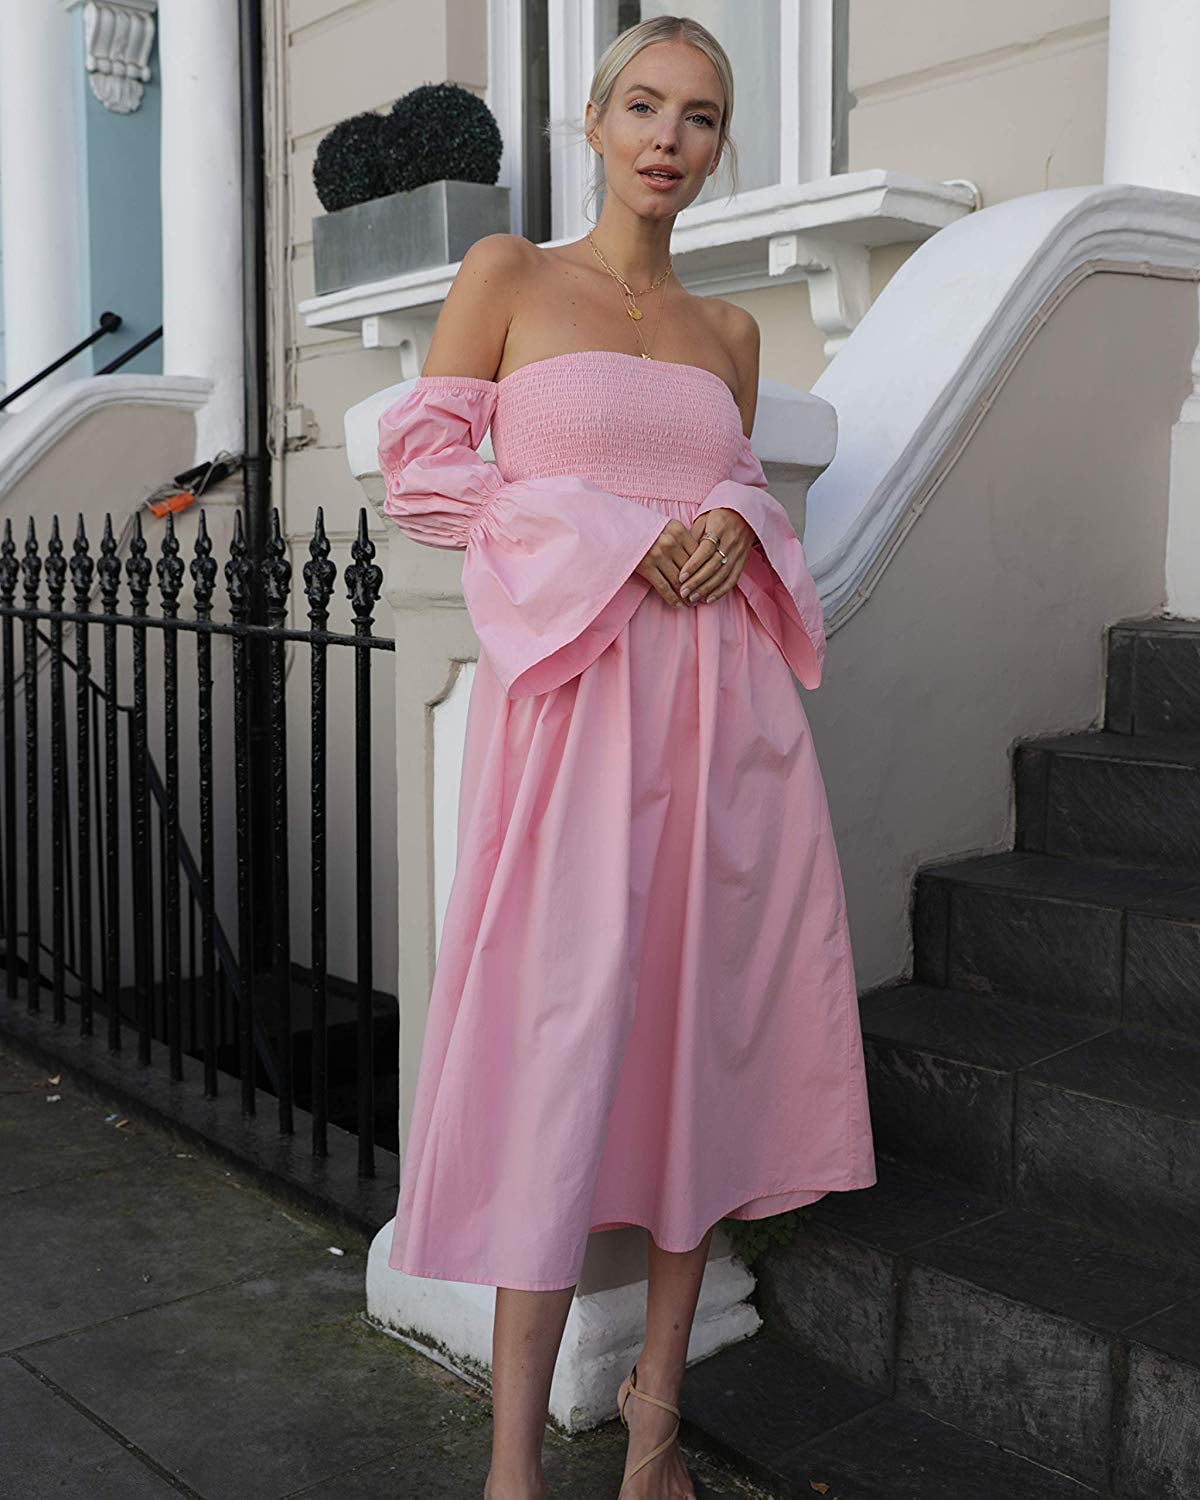 The Drop Womens Candy Pink Off Shoulder Tiered Puff Sleeve Midi Dress by @leoniehanne 